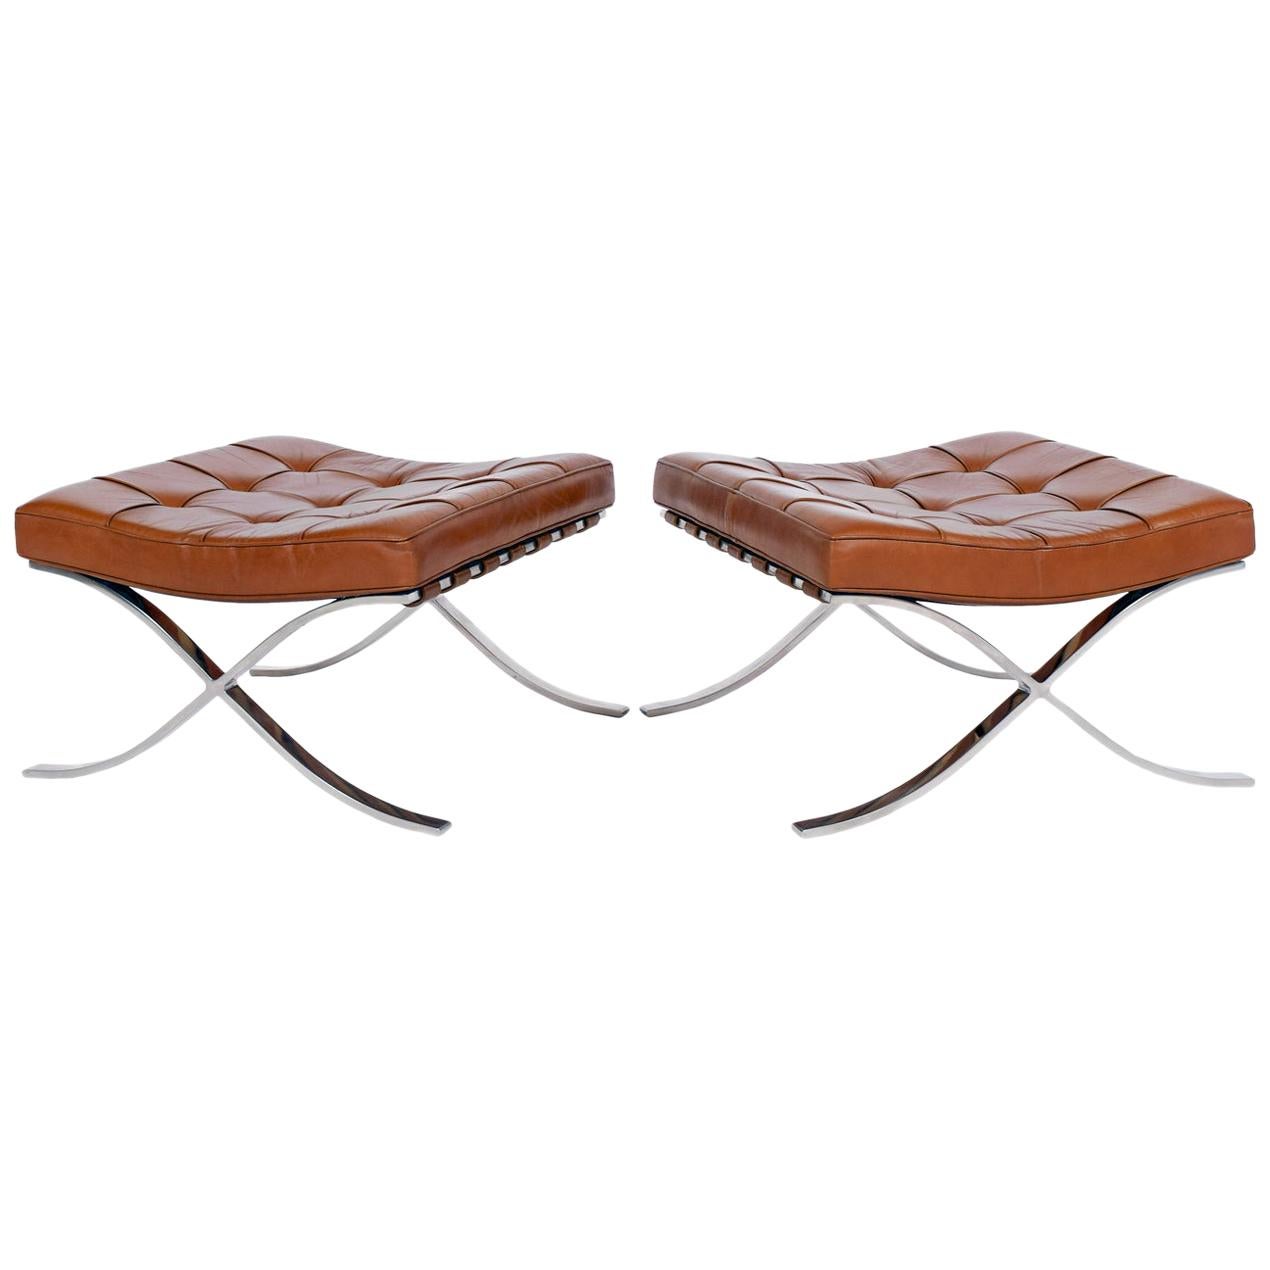 Designed in 1928 by Mies van der Rohe, this pair is vintage 1970s. Stainless steel X-frame occasional stools with natural leather seat and leather lacing. Made by Knoll International.